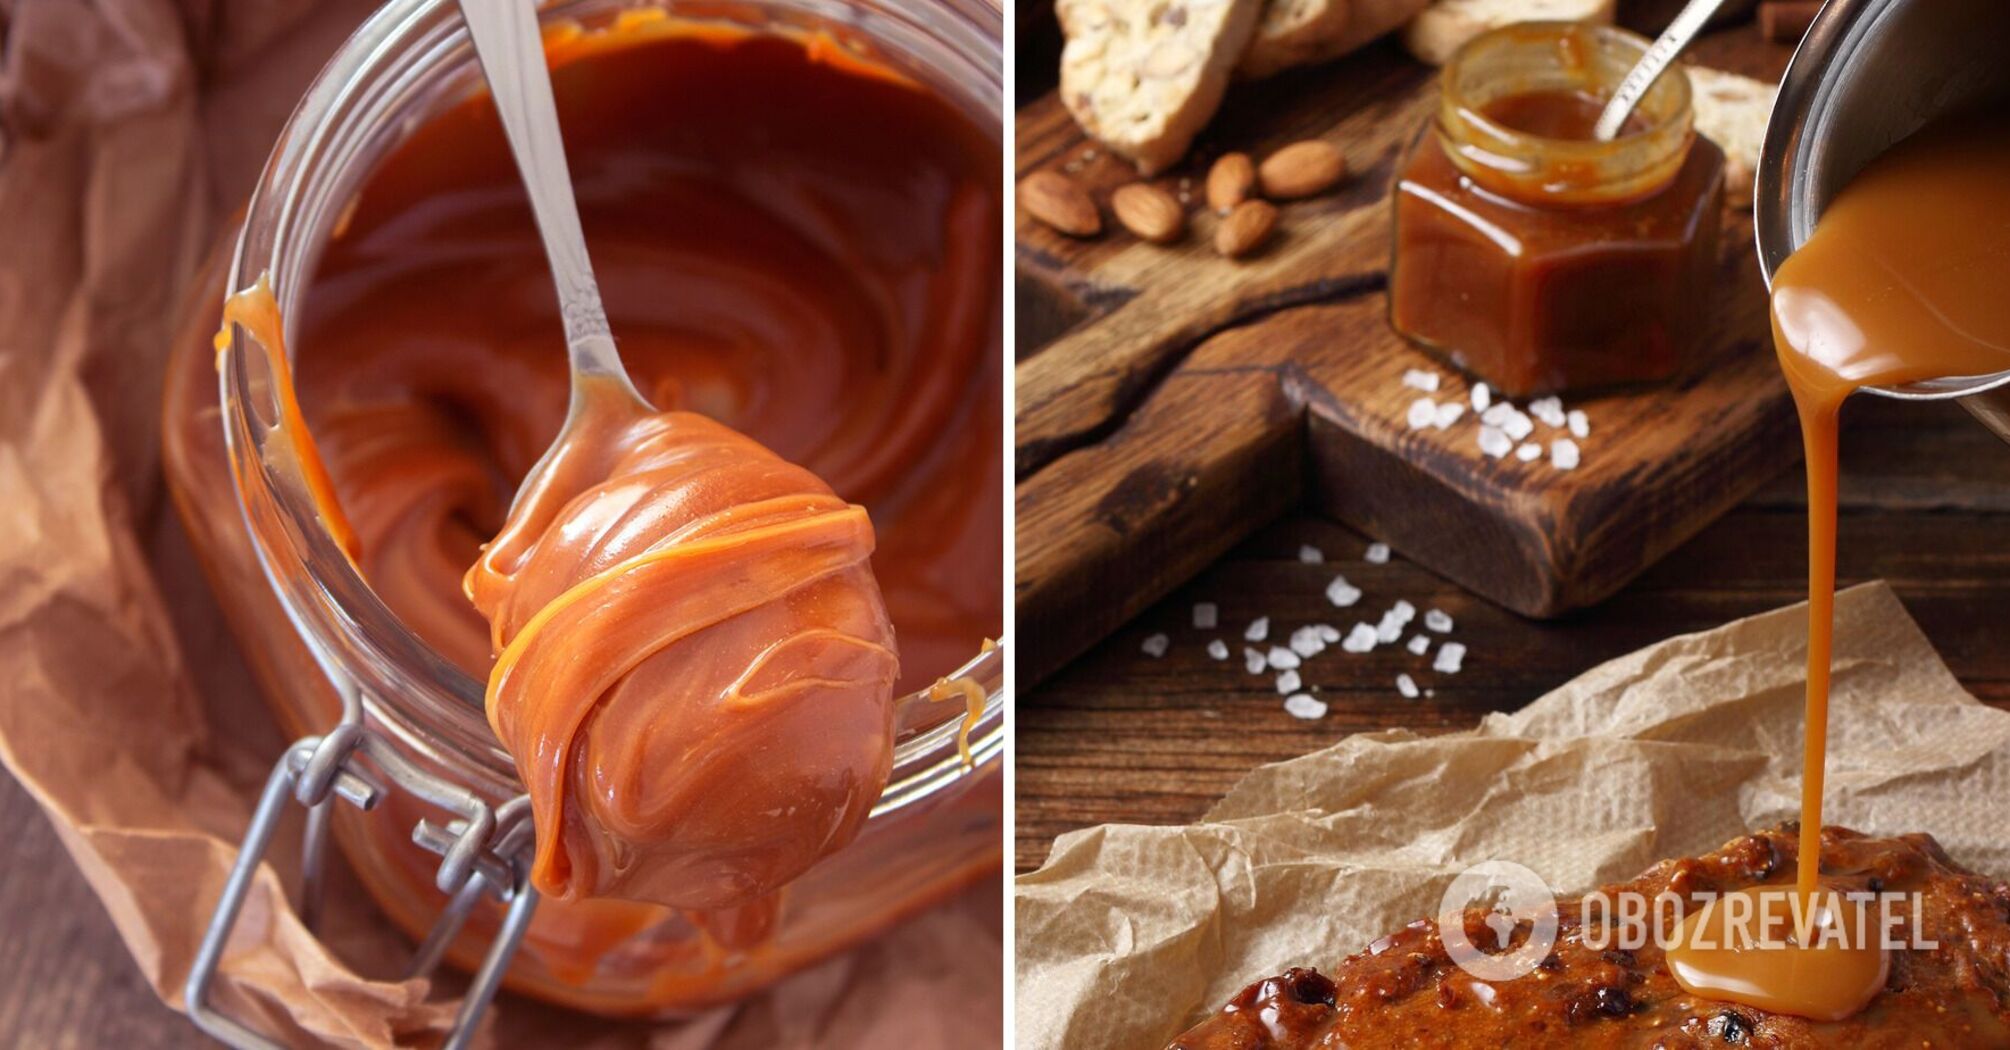 How to cook caramel correctly